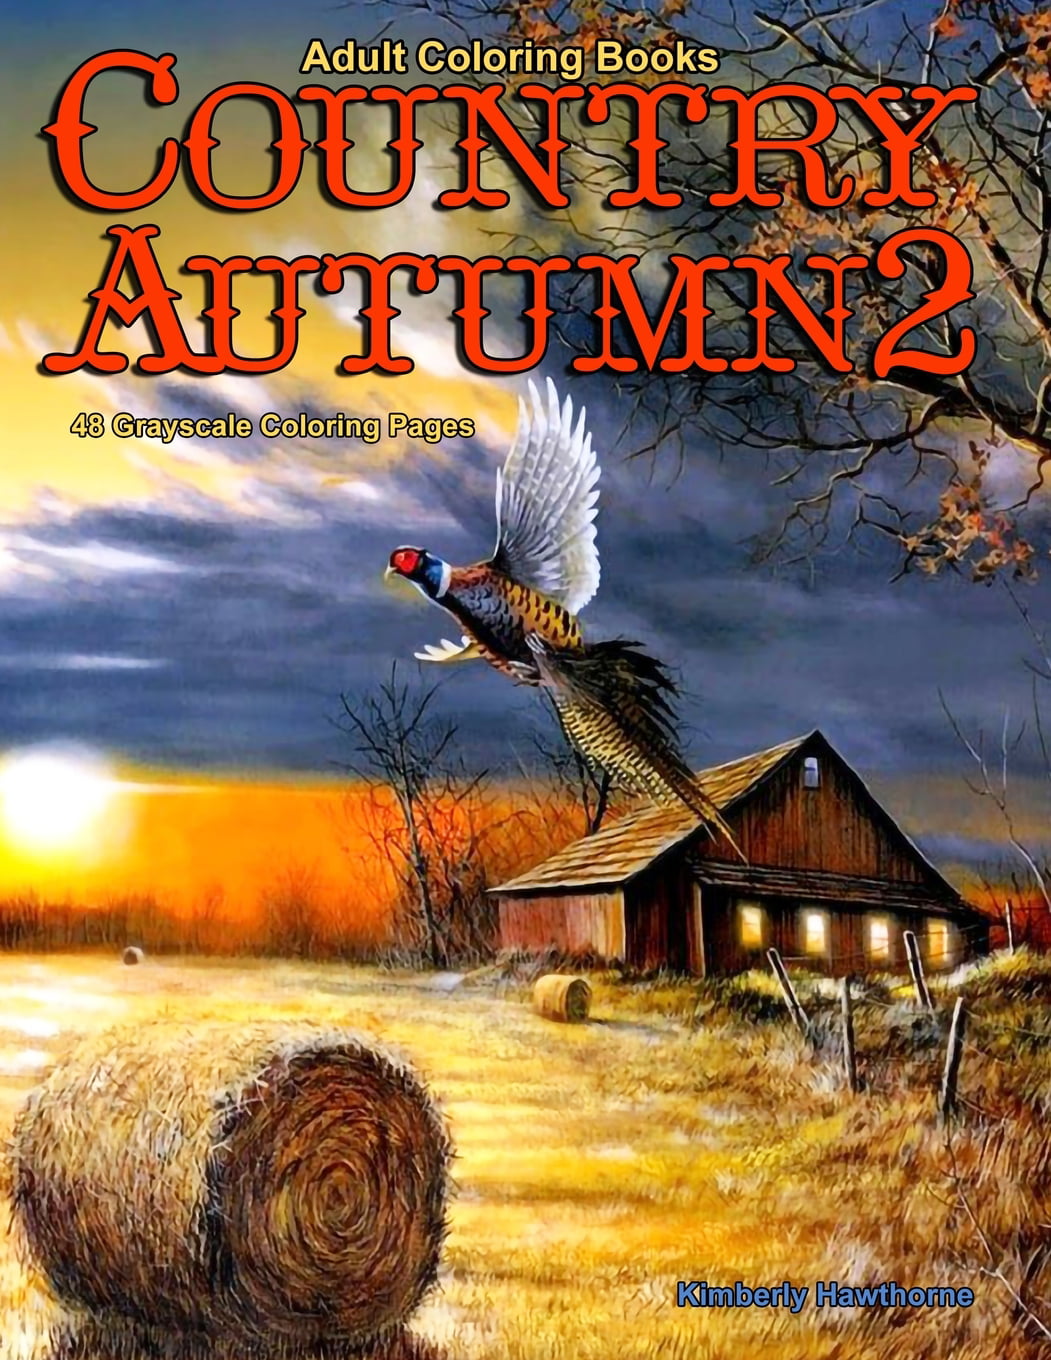 Life Escapes Country Autumn: Adult Coloring Books Country Autumn 2: 48